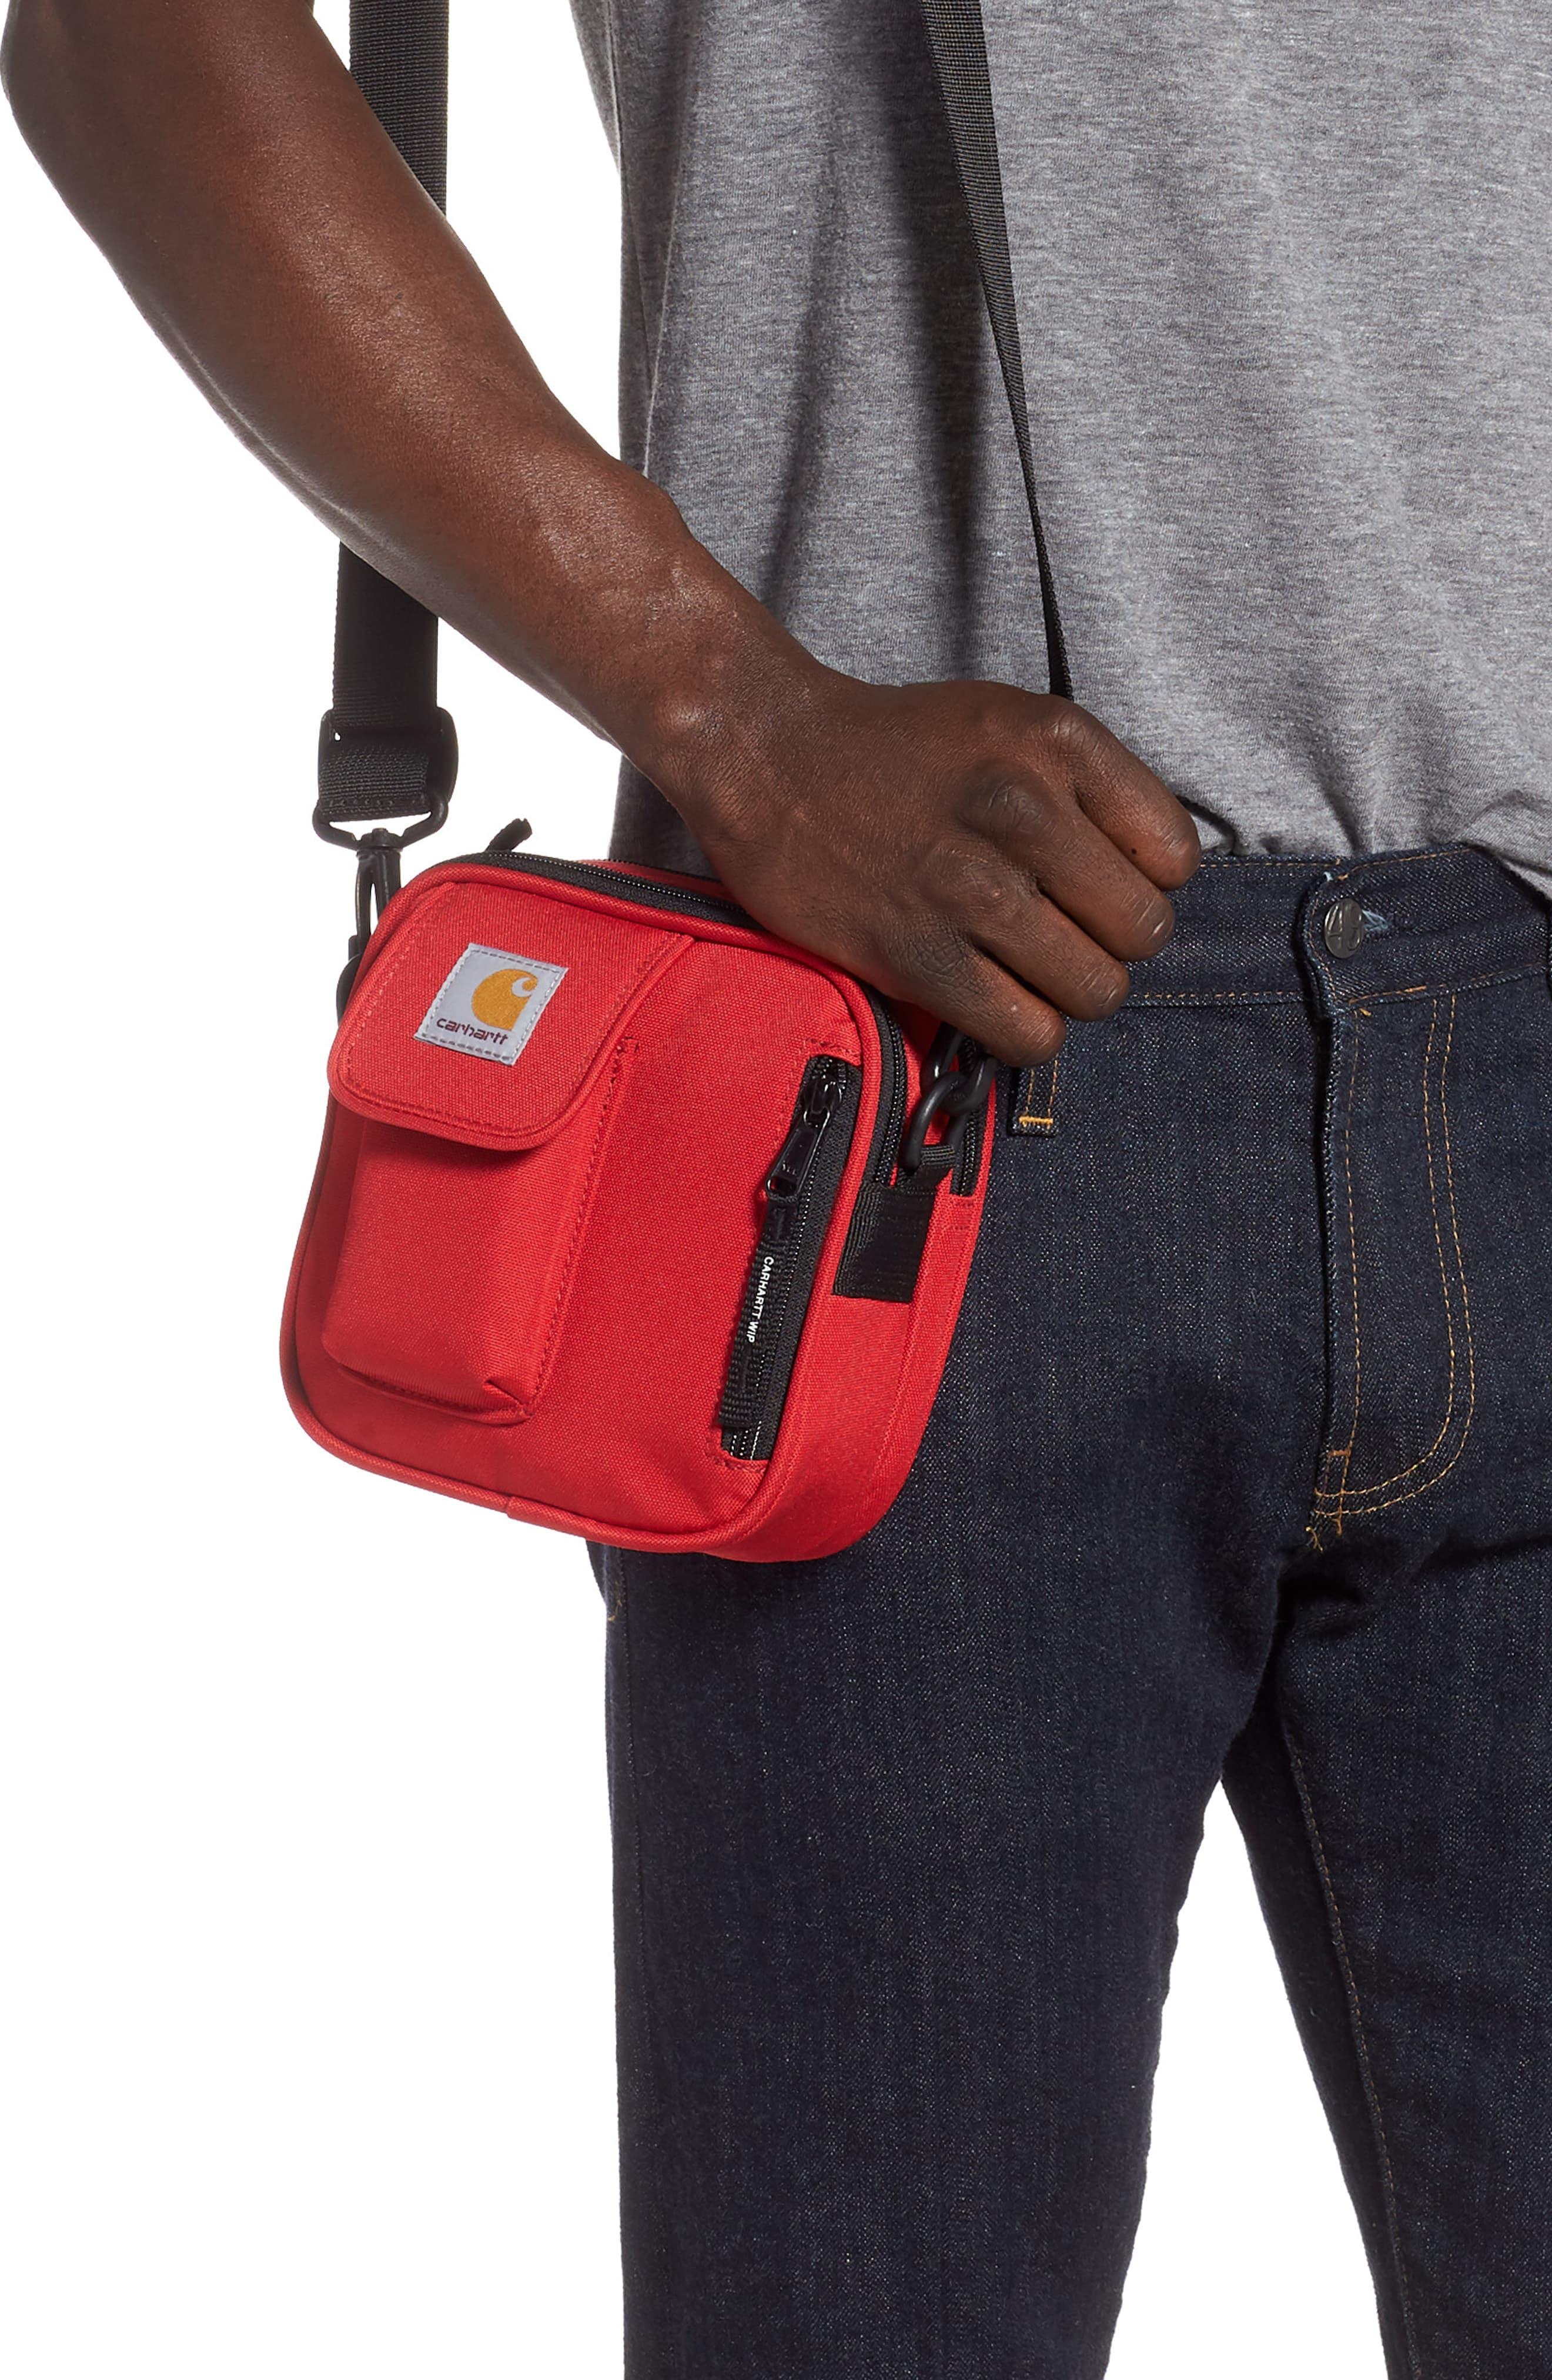 Carhartt WIP Canvas Essentials Bag in Red for Men - Lyst